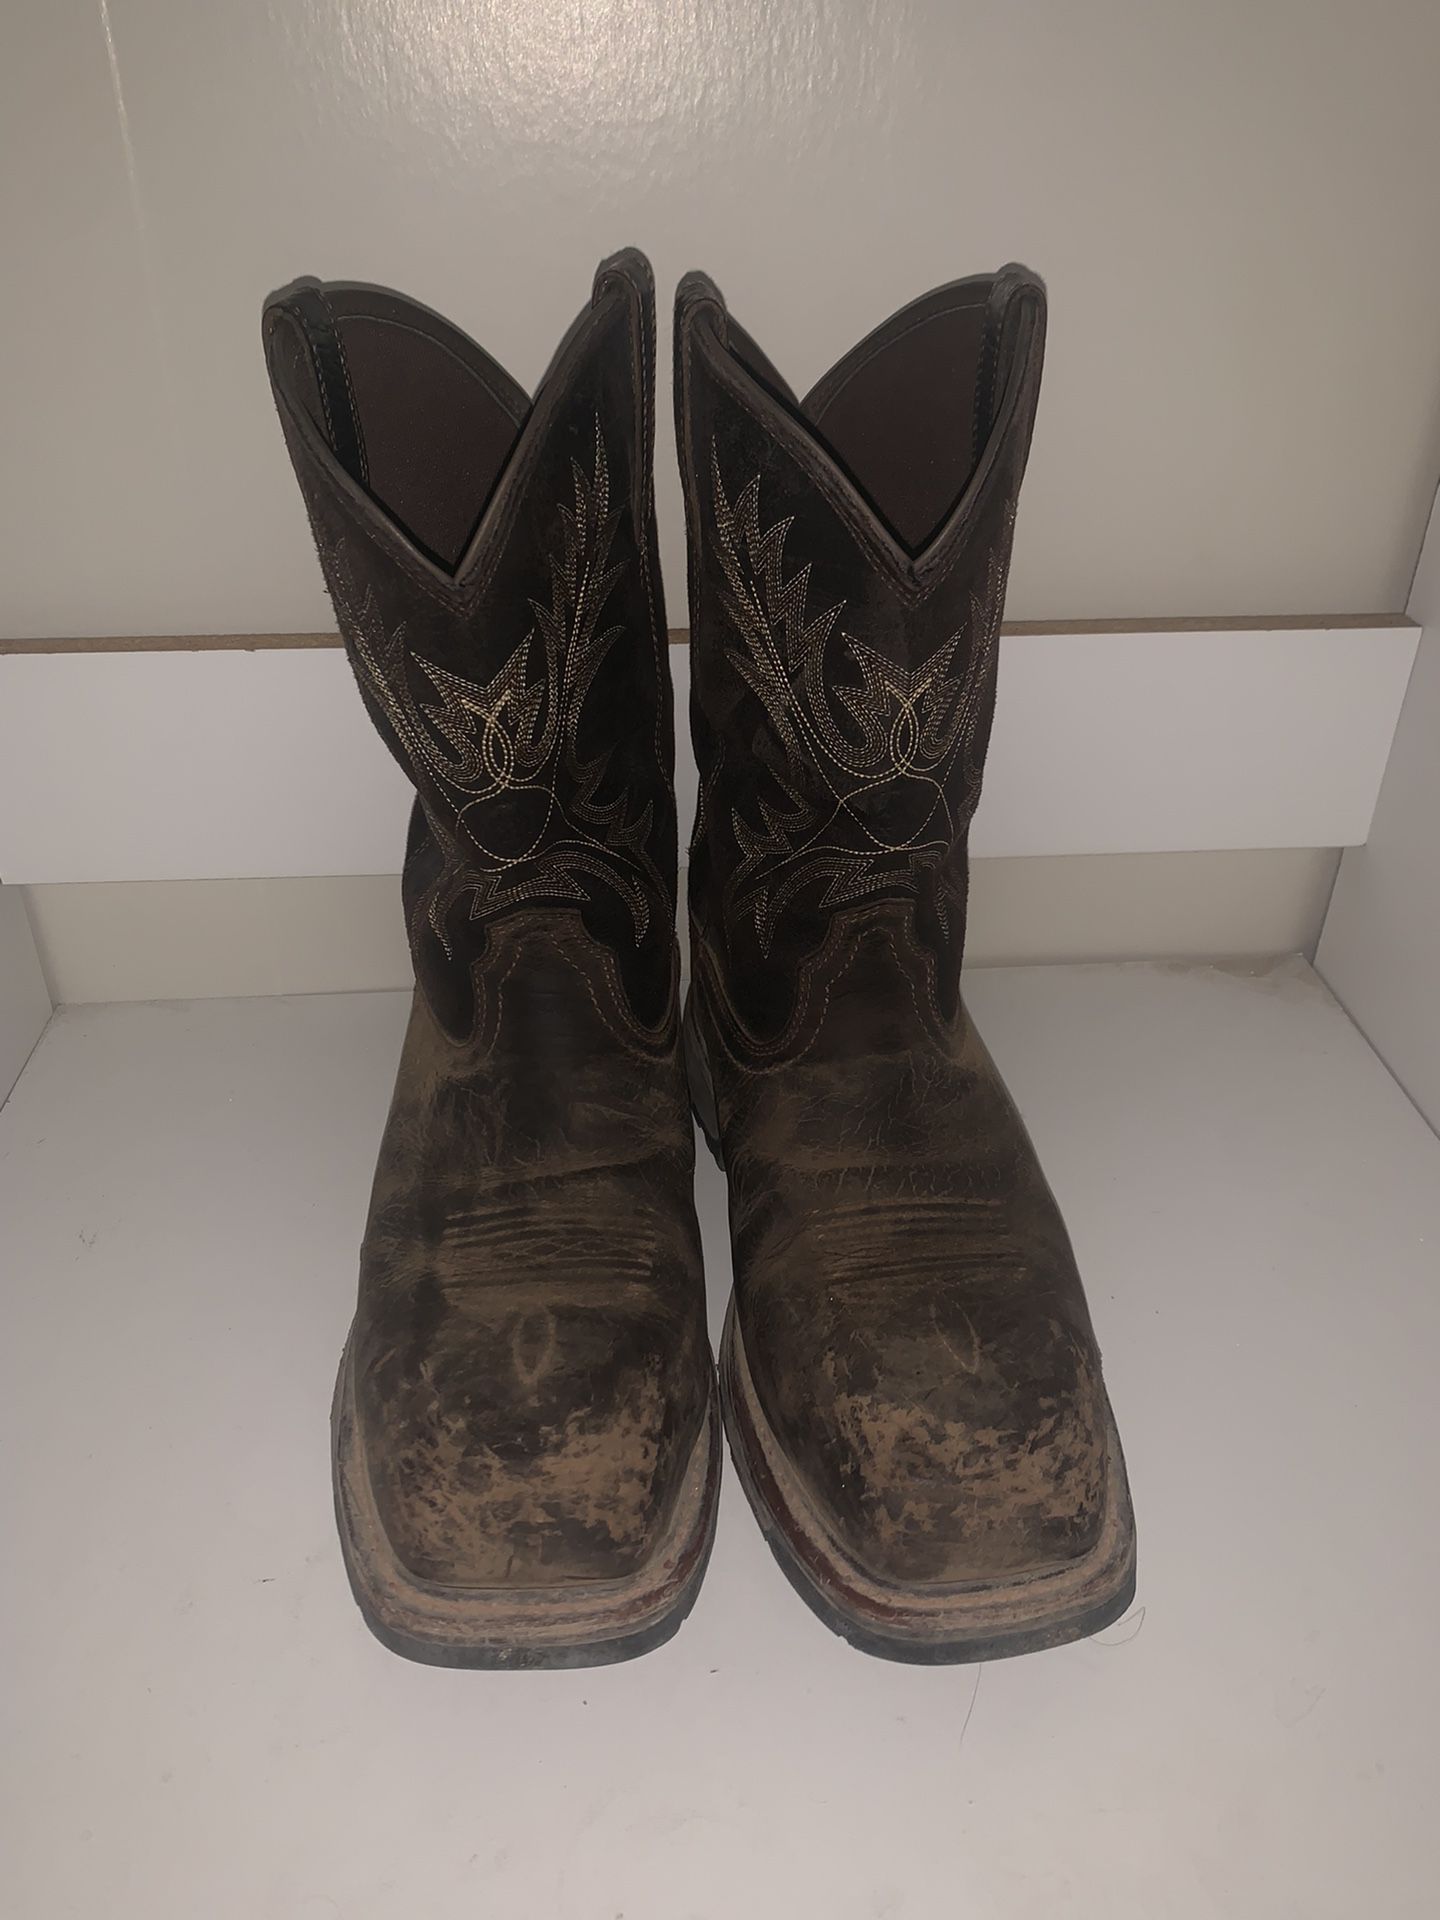 ARIAT Composite Toe Work Boots for Sale in Phoenix, AZ - OfferUp